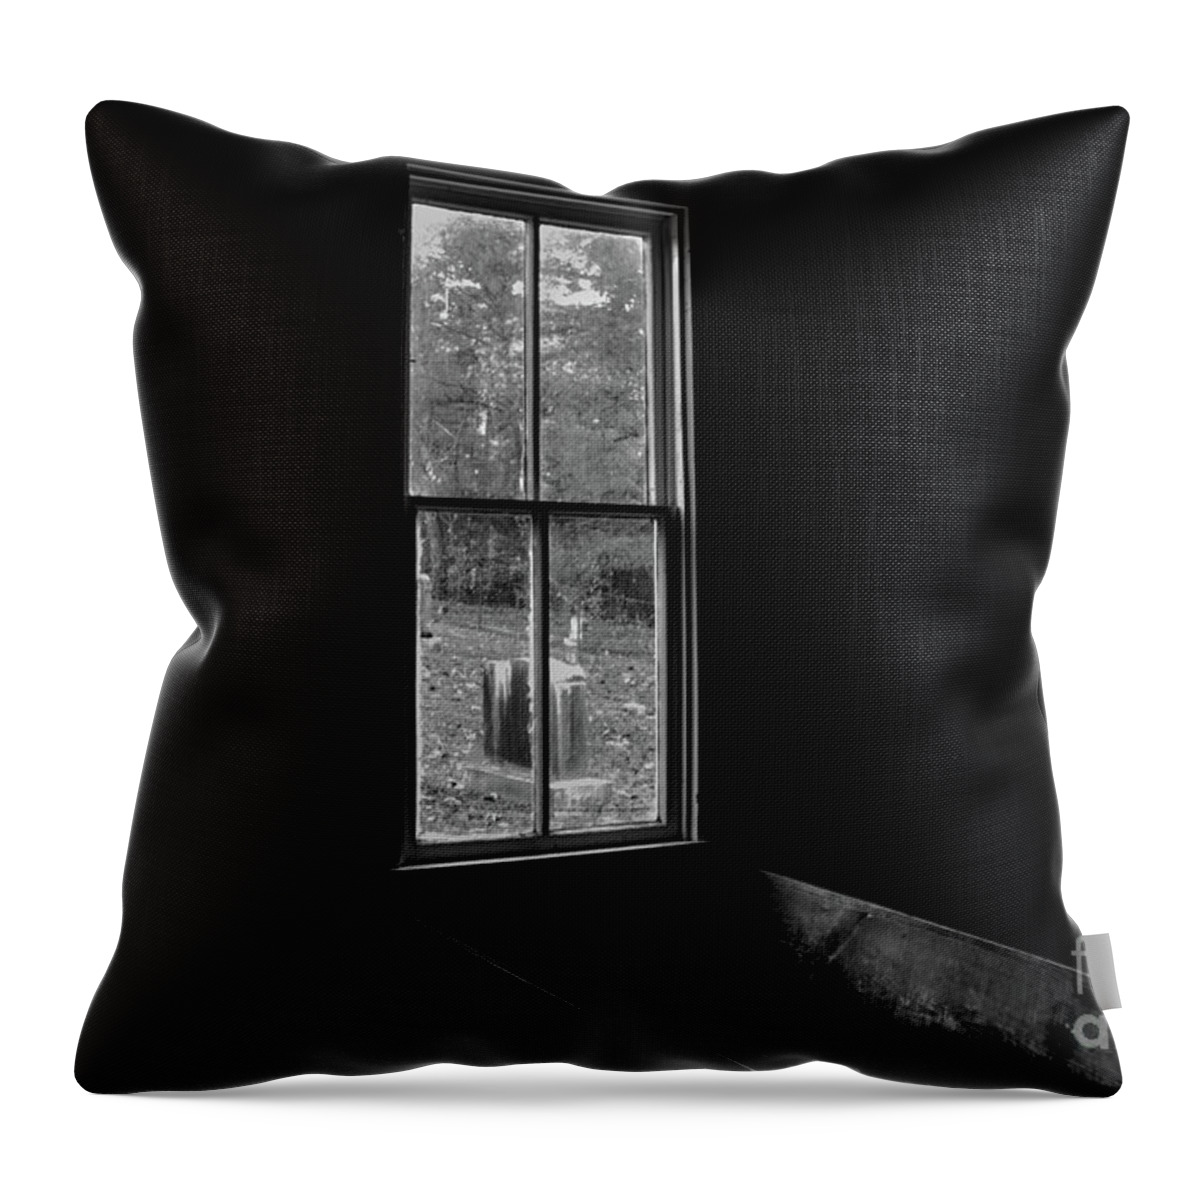 Cades Cove Throw Pillow featuring the photograph Methodist Church Window at Cades Cove - B and W by John Greco